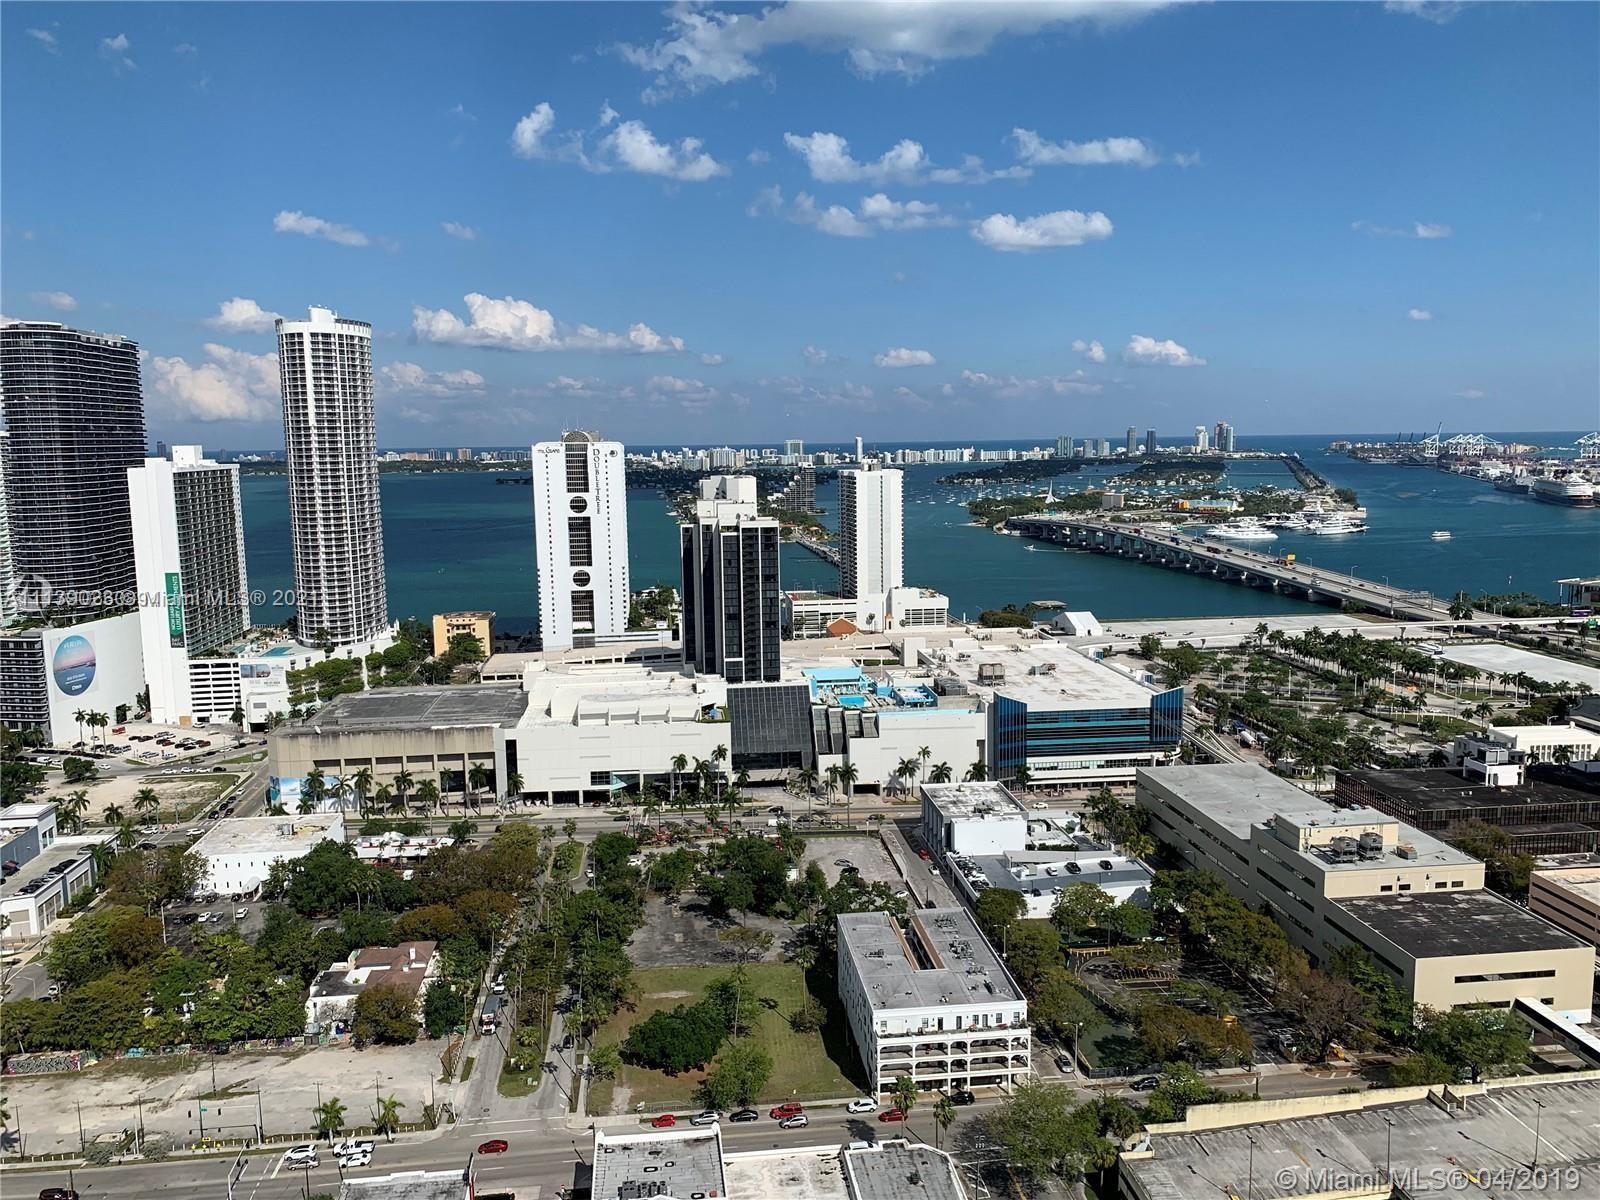 BEST EAST WATER views! Amazing location: steps from the Metromover, Miami Central Station, AA Arena,